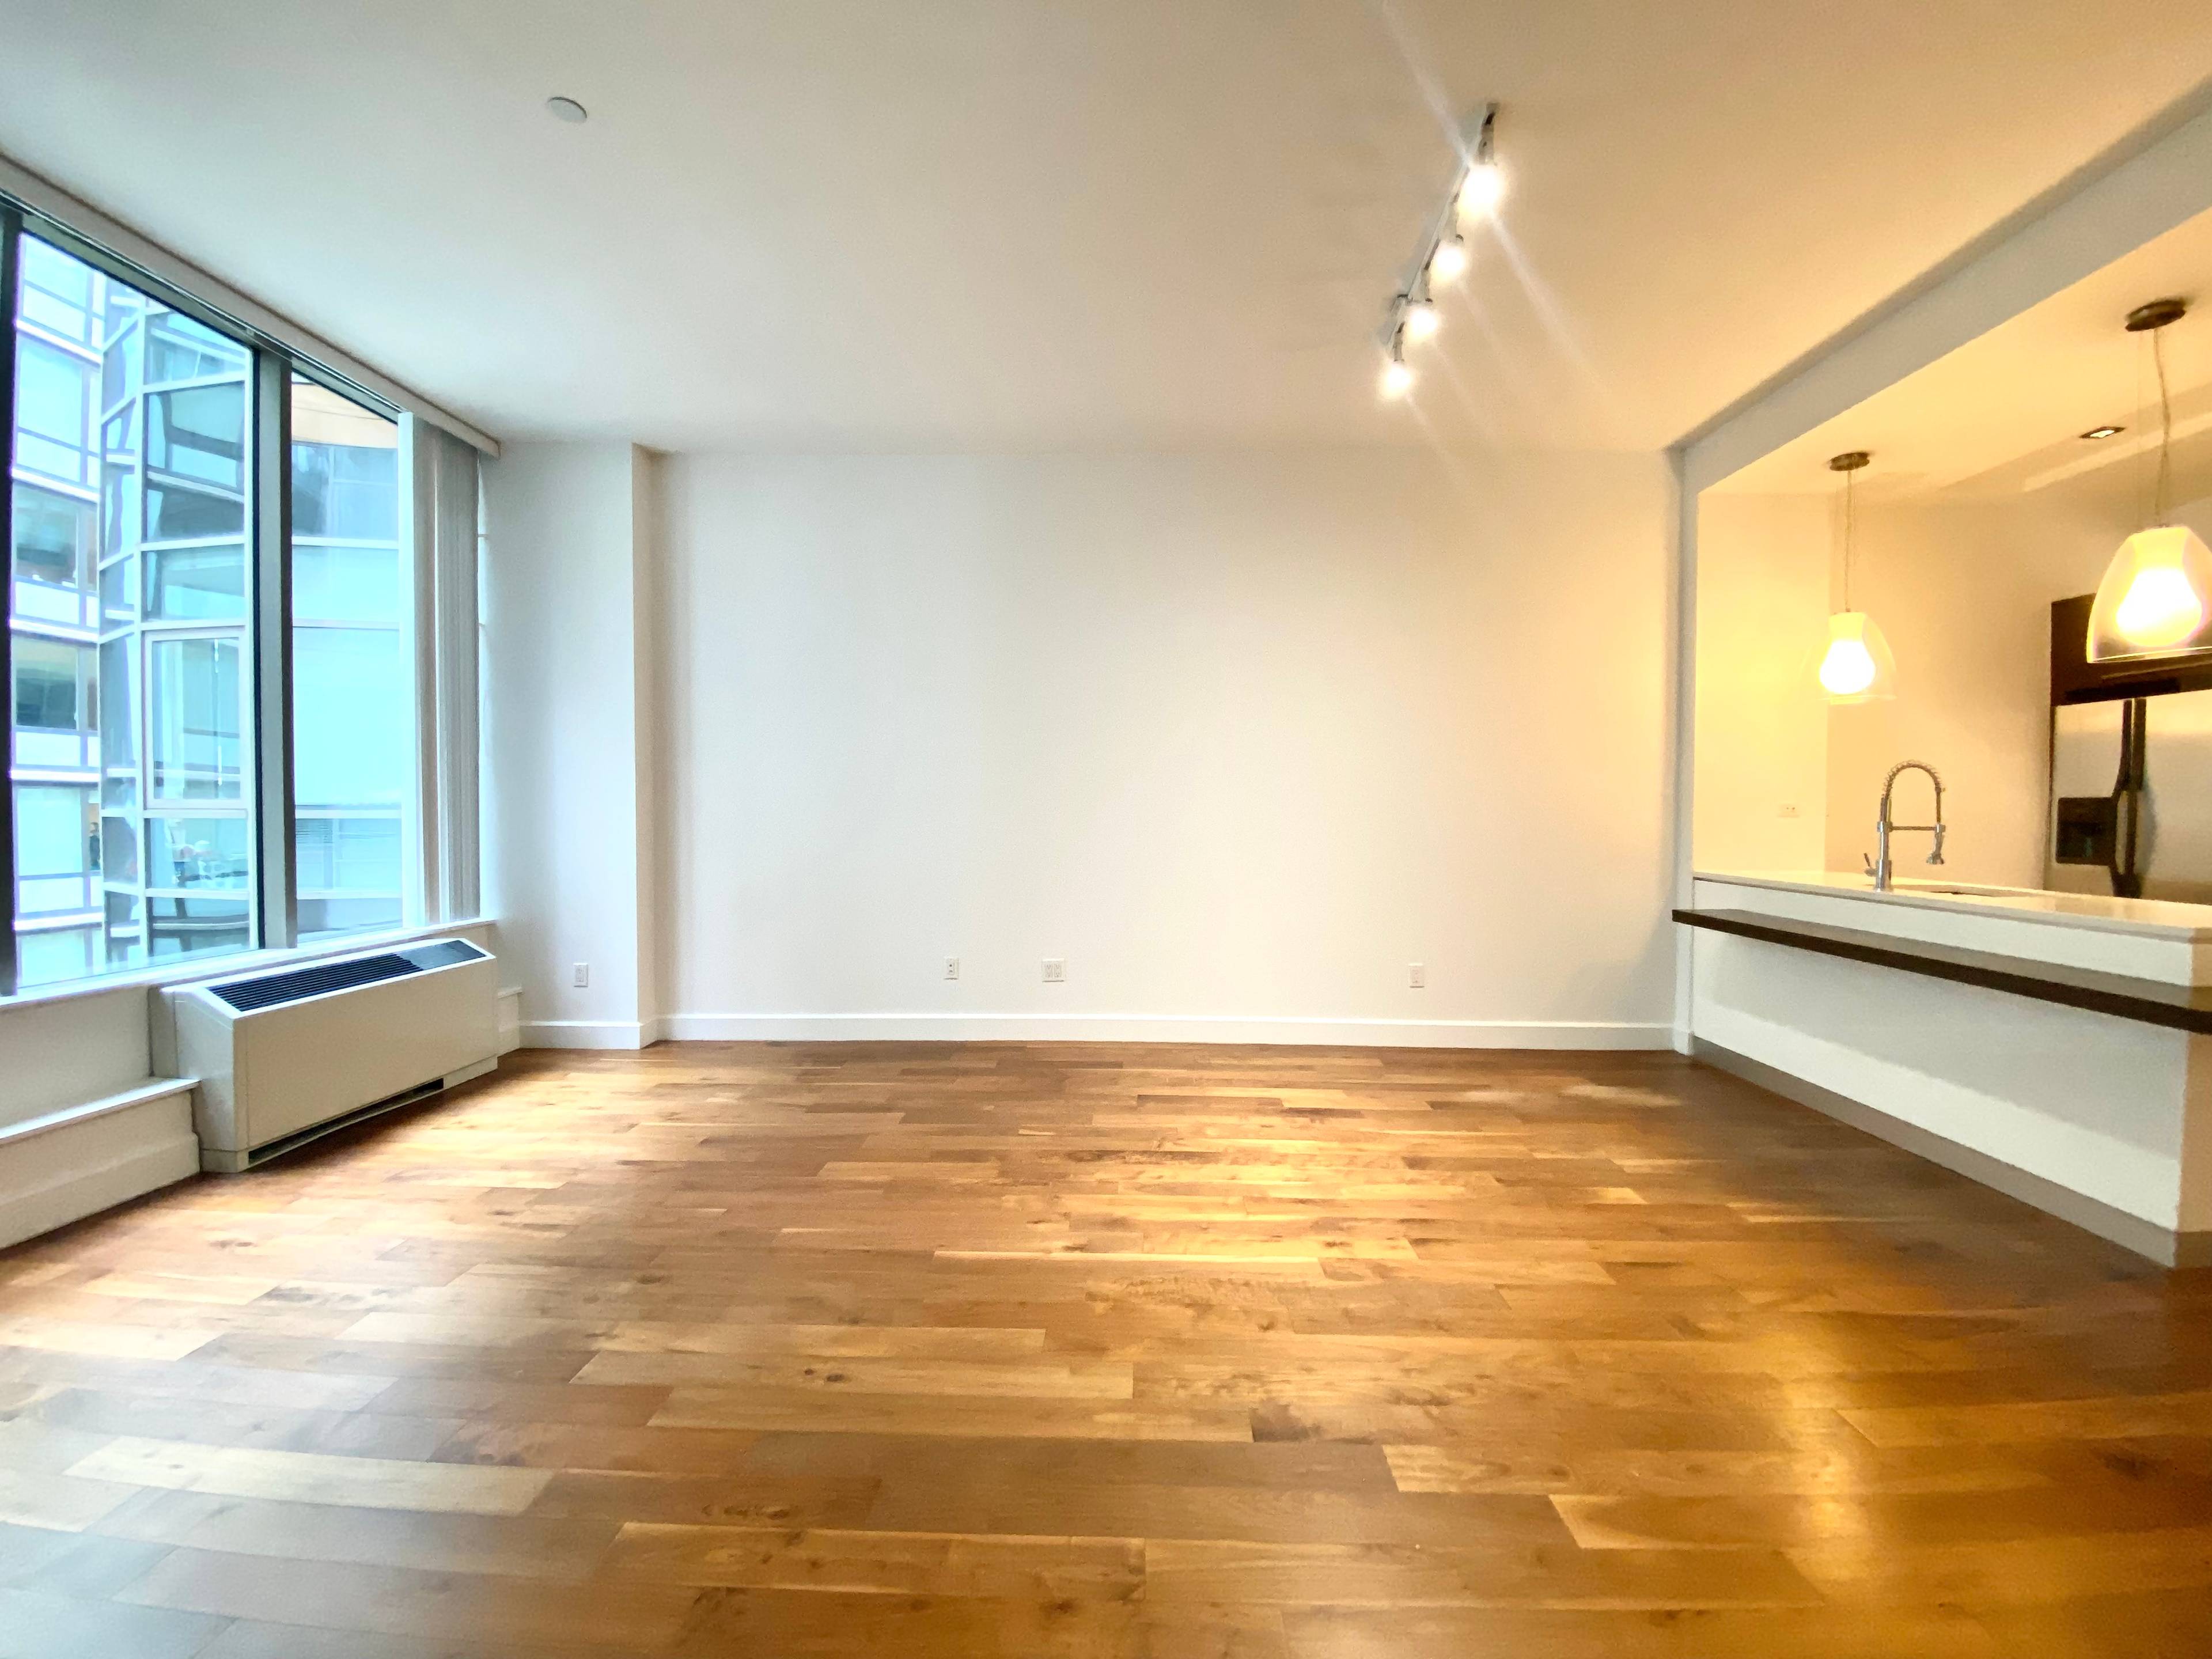 Powrhouse Condo - Largest one bedroom in Long Island City